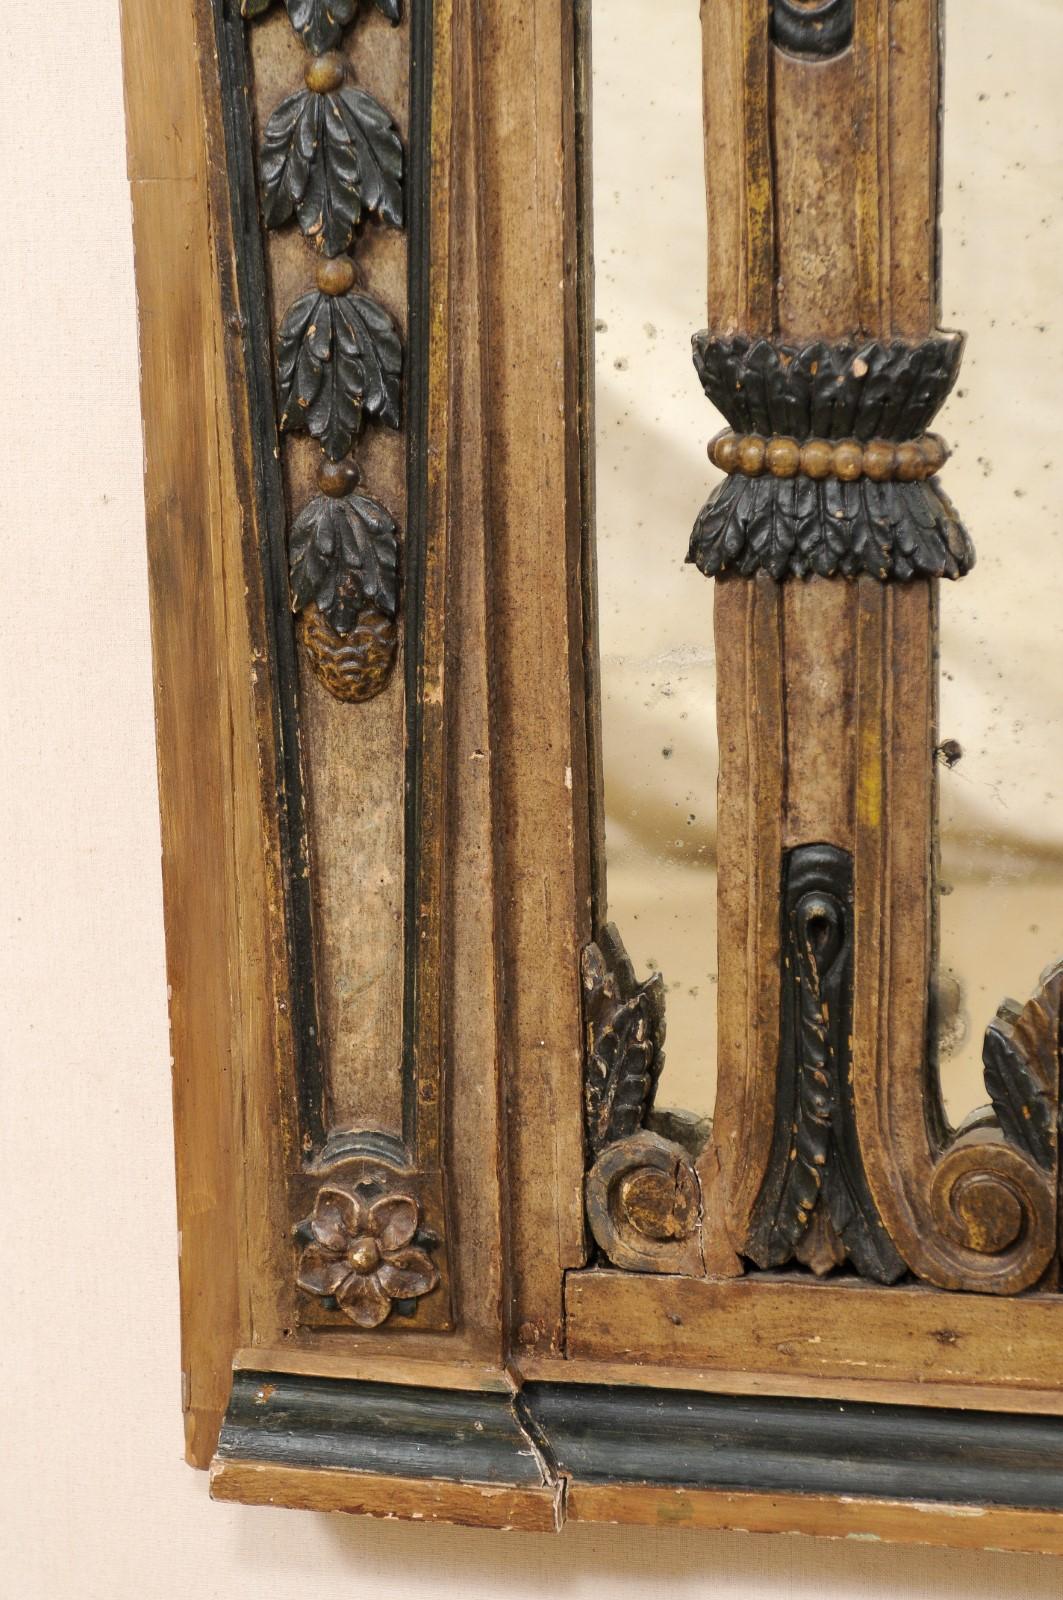 Early 19th Century Portuguese Carved Wood Gate with Mirror at Backside For Sale 3